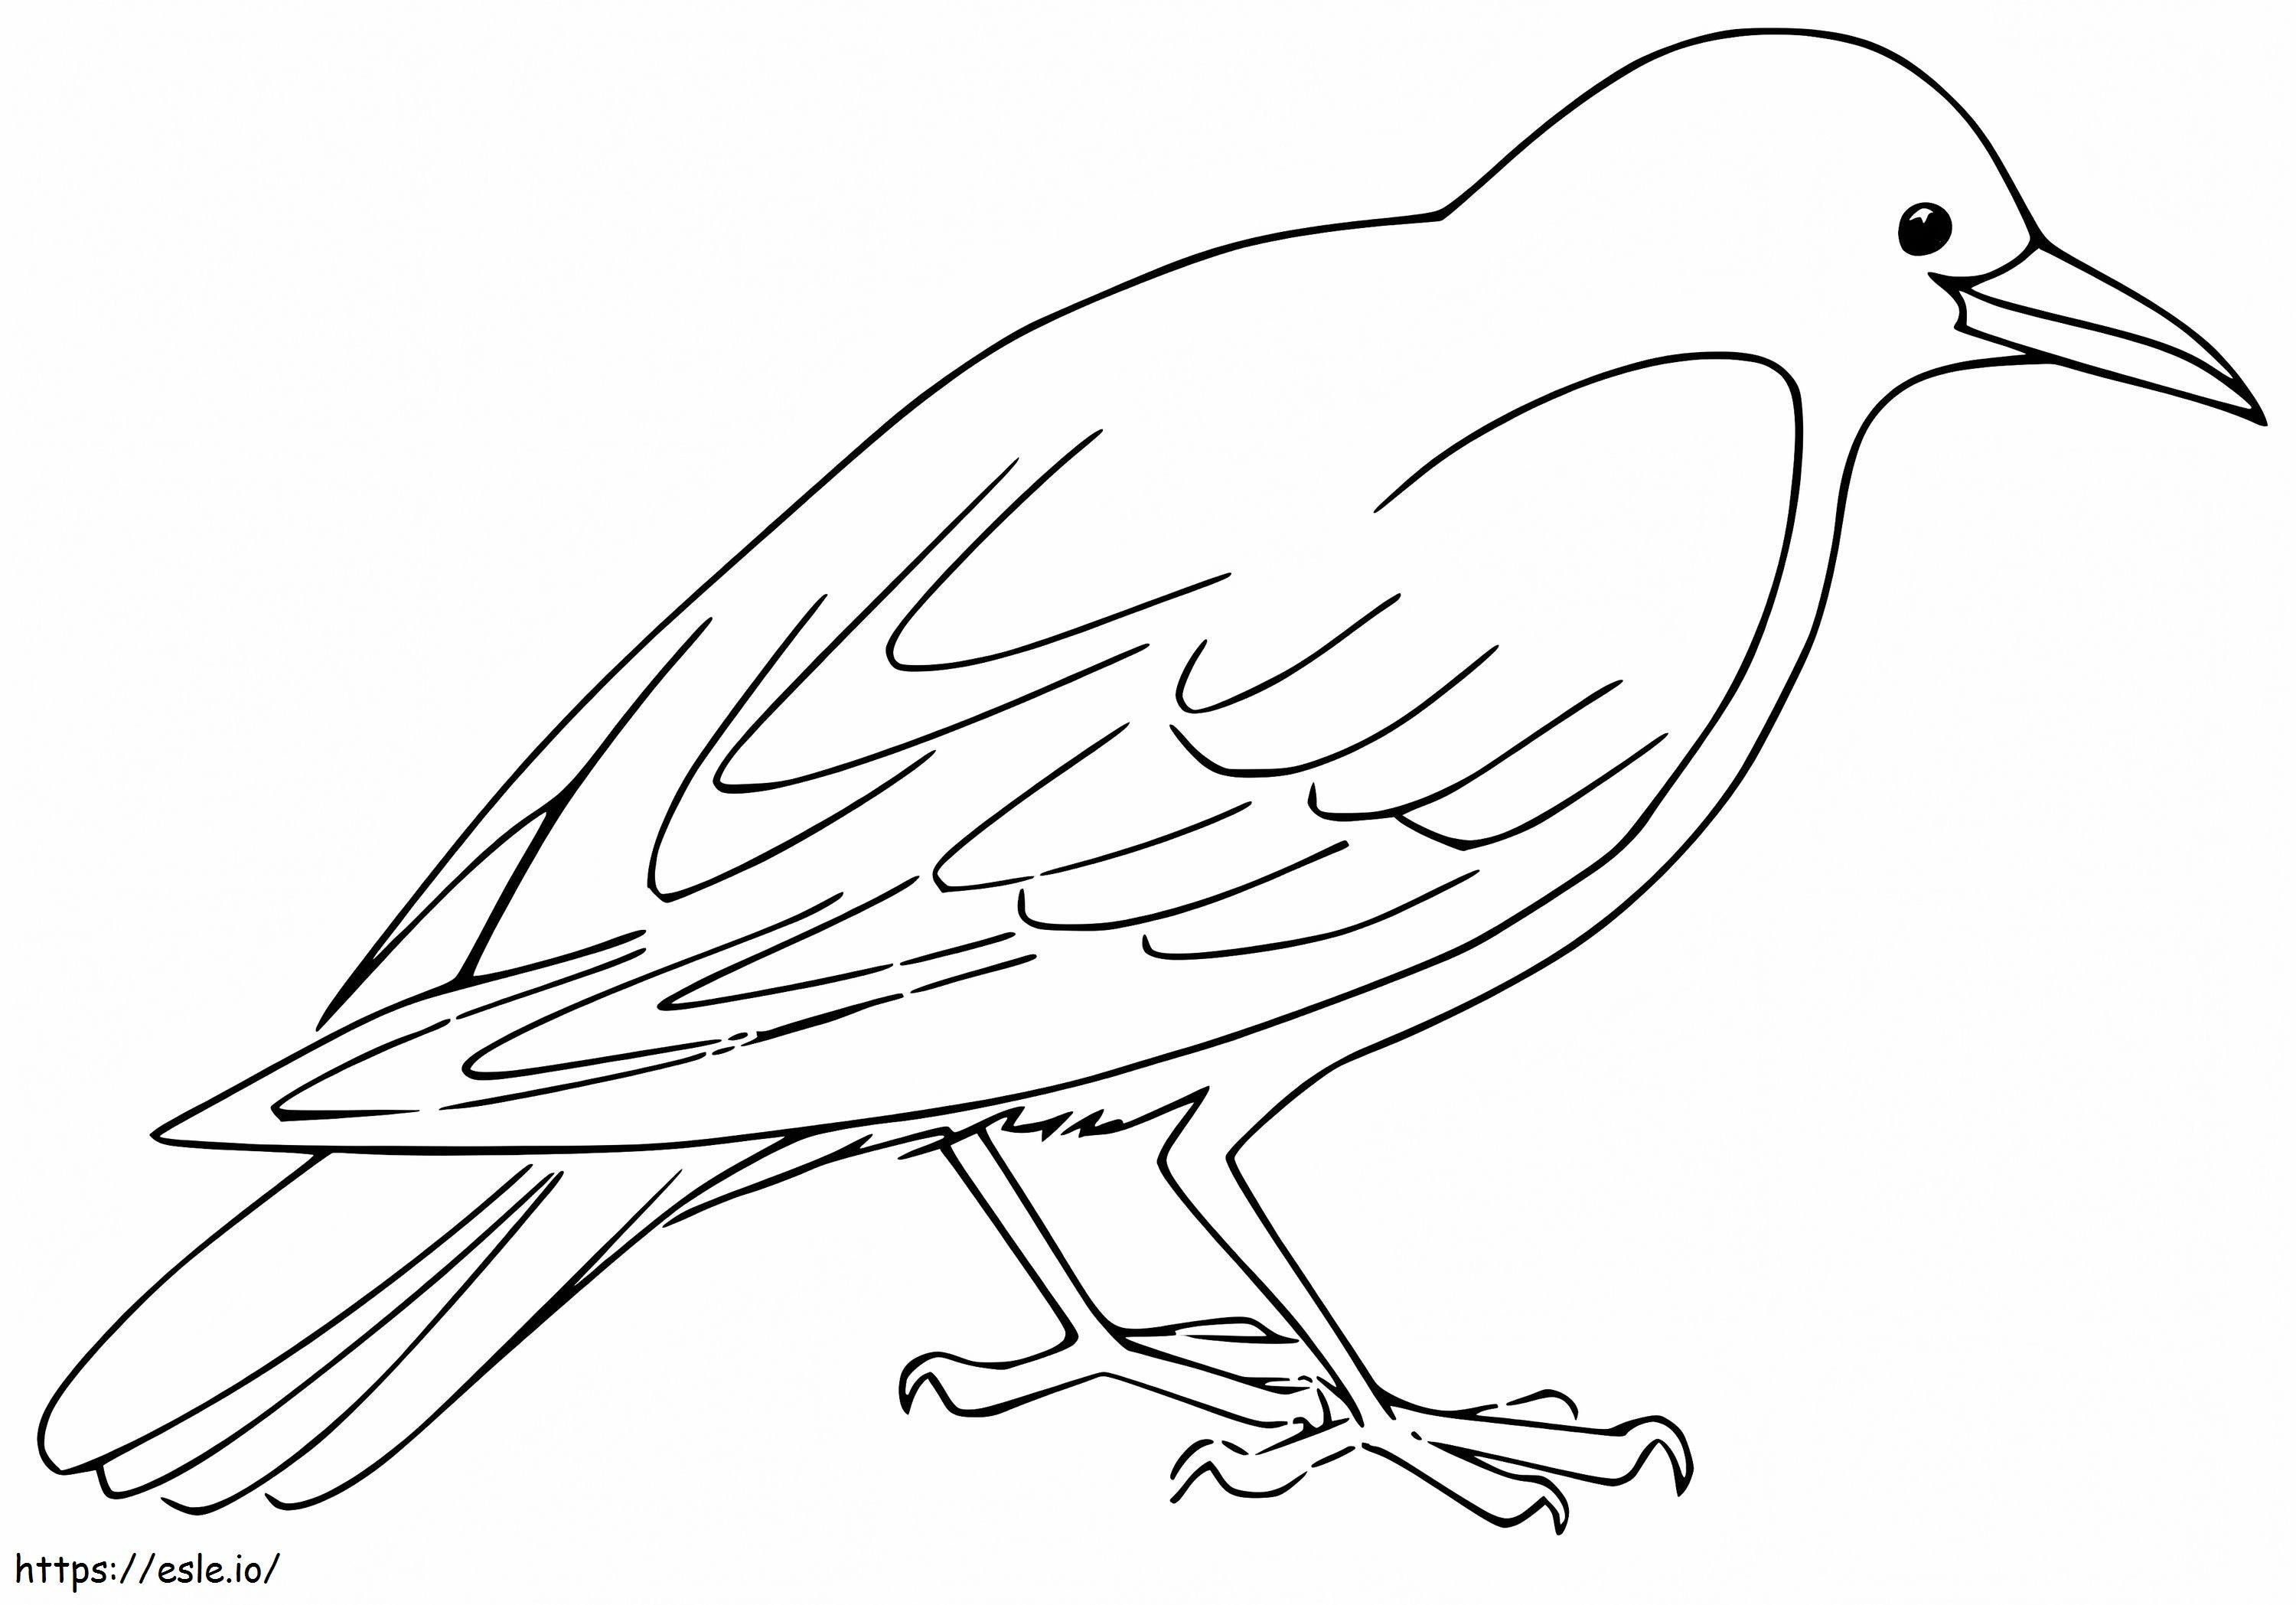 Raven 2 coloring page